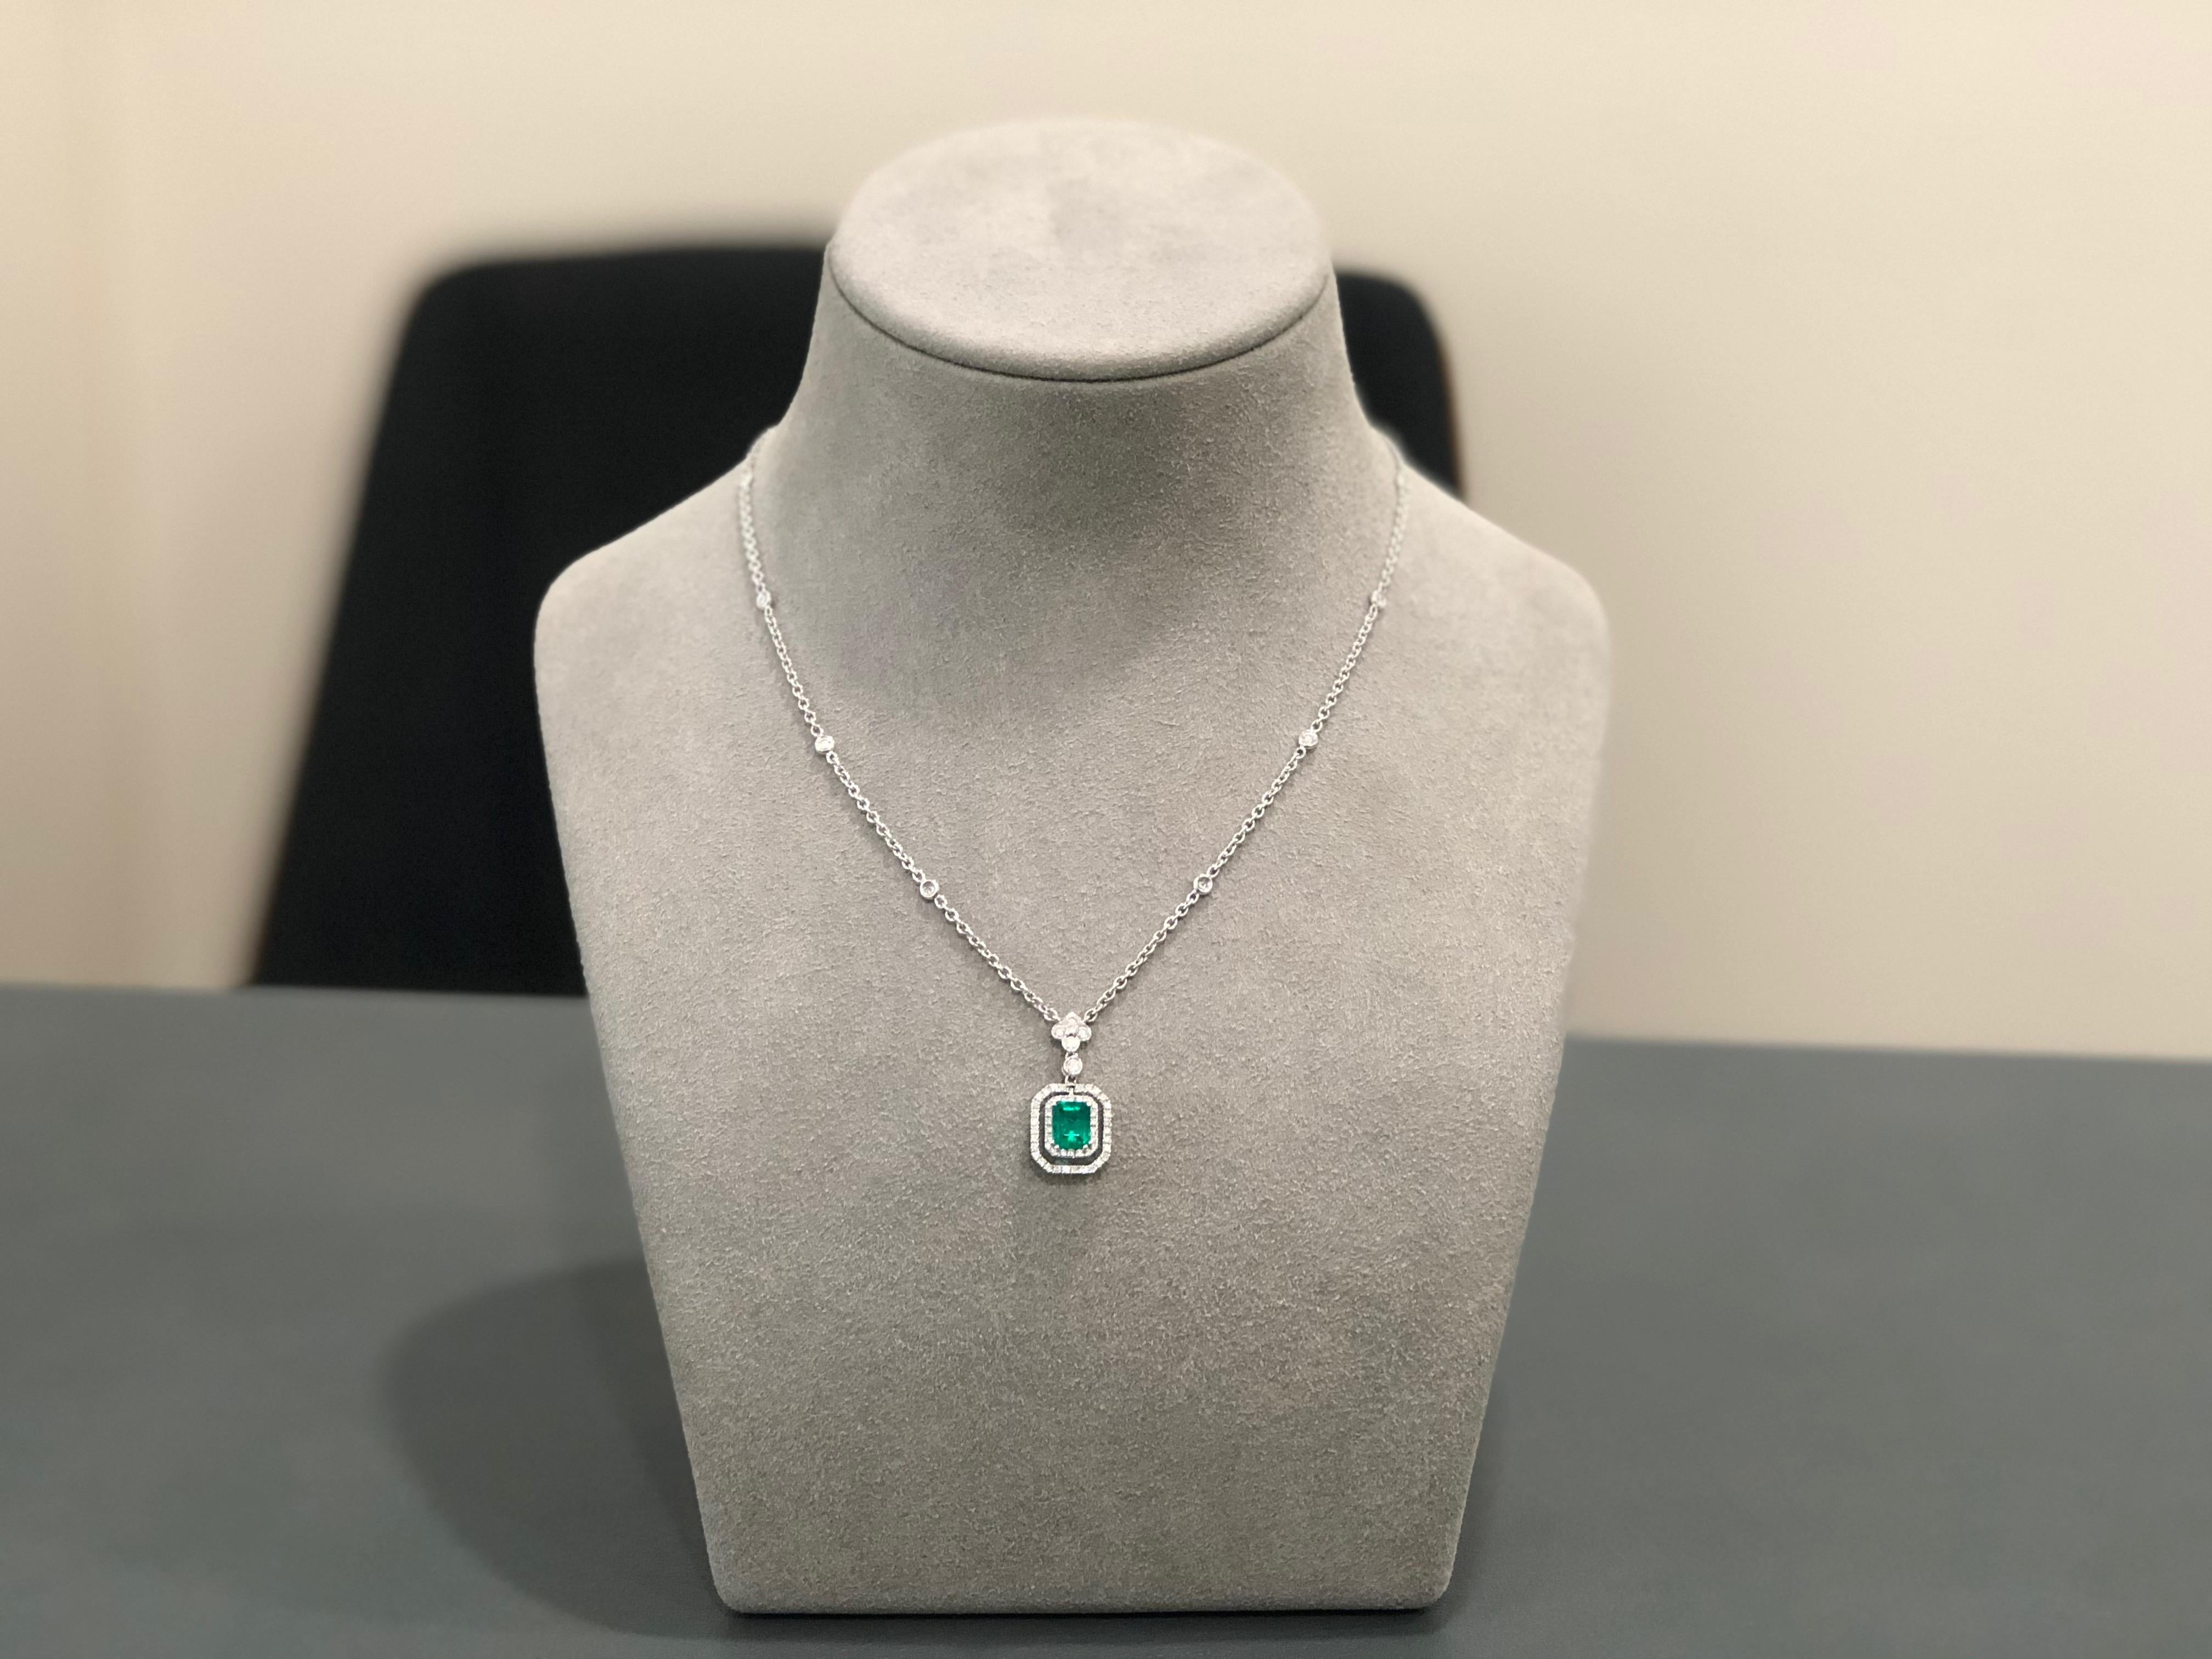 Elegant pendant set with a green emerald cut emerald center; surrounded by a two rows of round diamonds. The emerald weighs 1.04 carats. Pendant spaced by a bezel set round diamond. 4 Bezel set round diamond surmount with a 16 inch 18k white gold